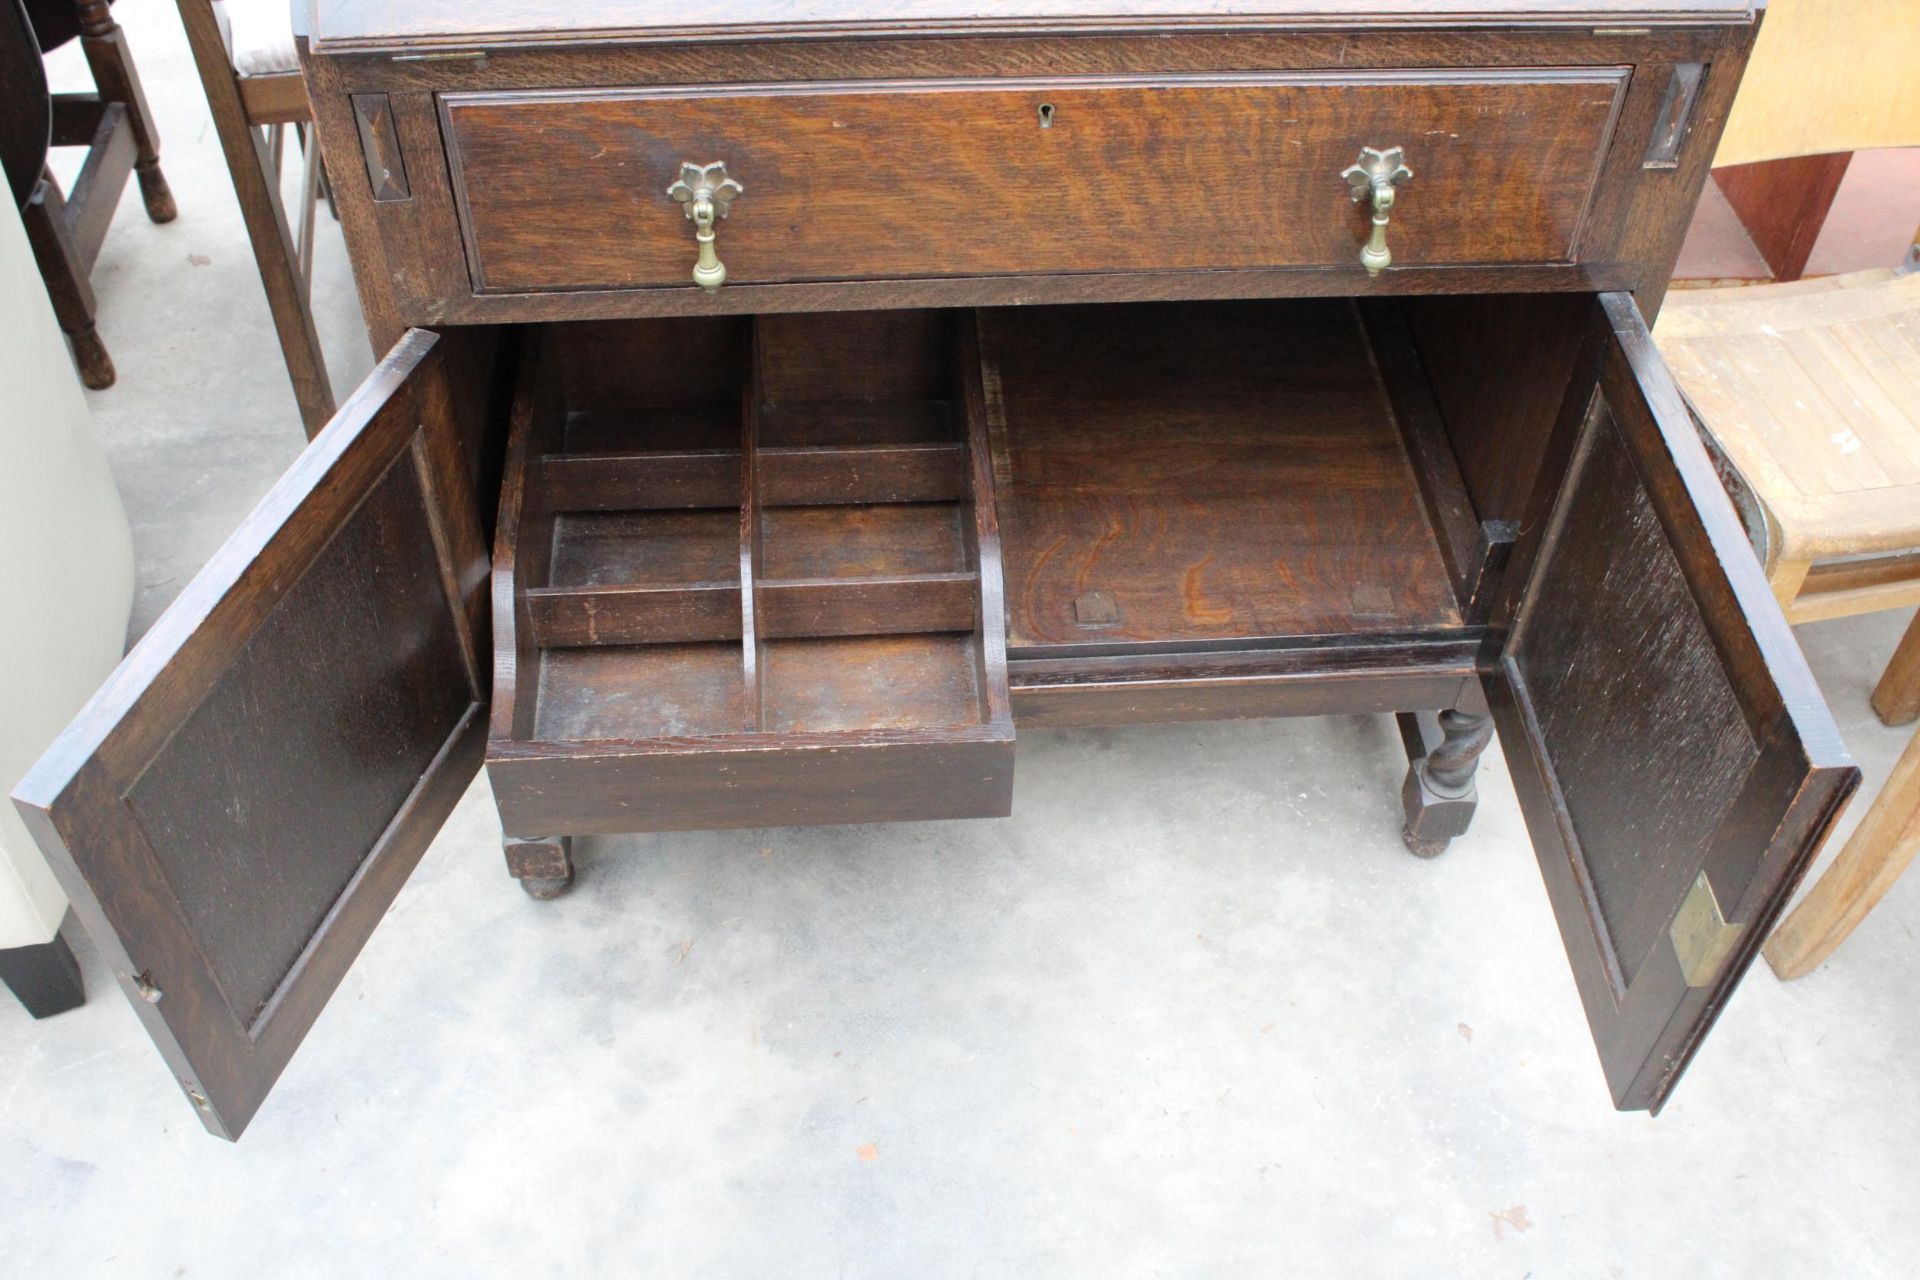 AN EARLY 20TH CENTURY OAK BUREAU BOOKCASE WITH GLAZED AND LEADED UPPER PORTION ENCLOSING CUTLERY - Image 7 of 7